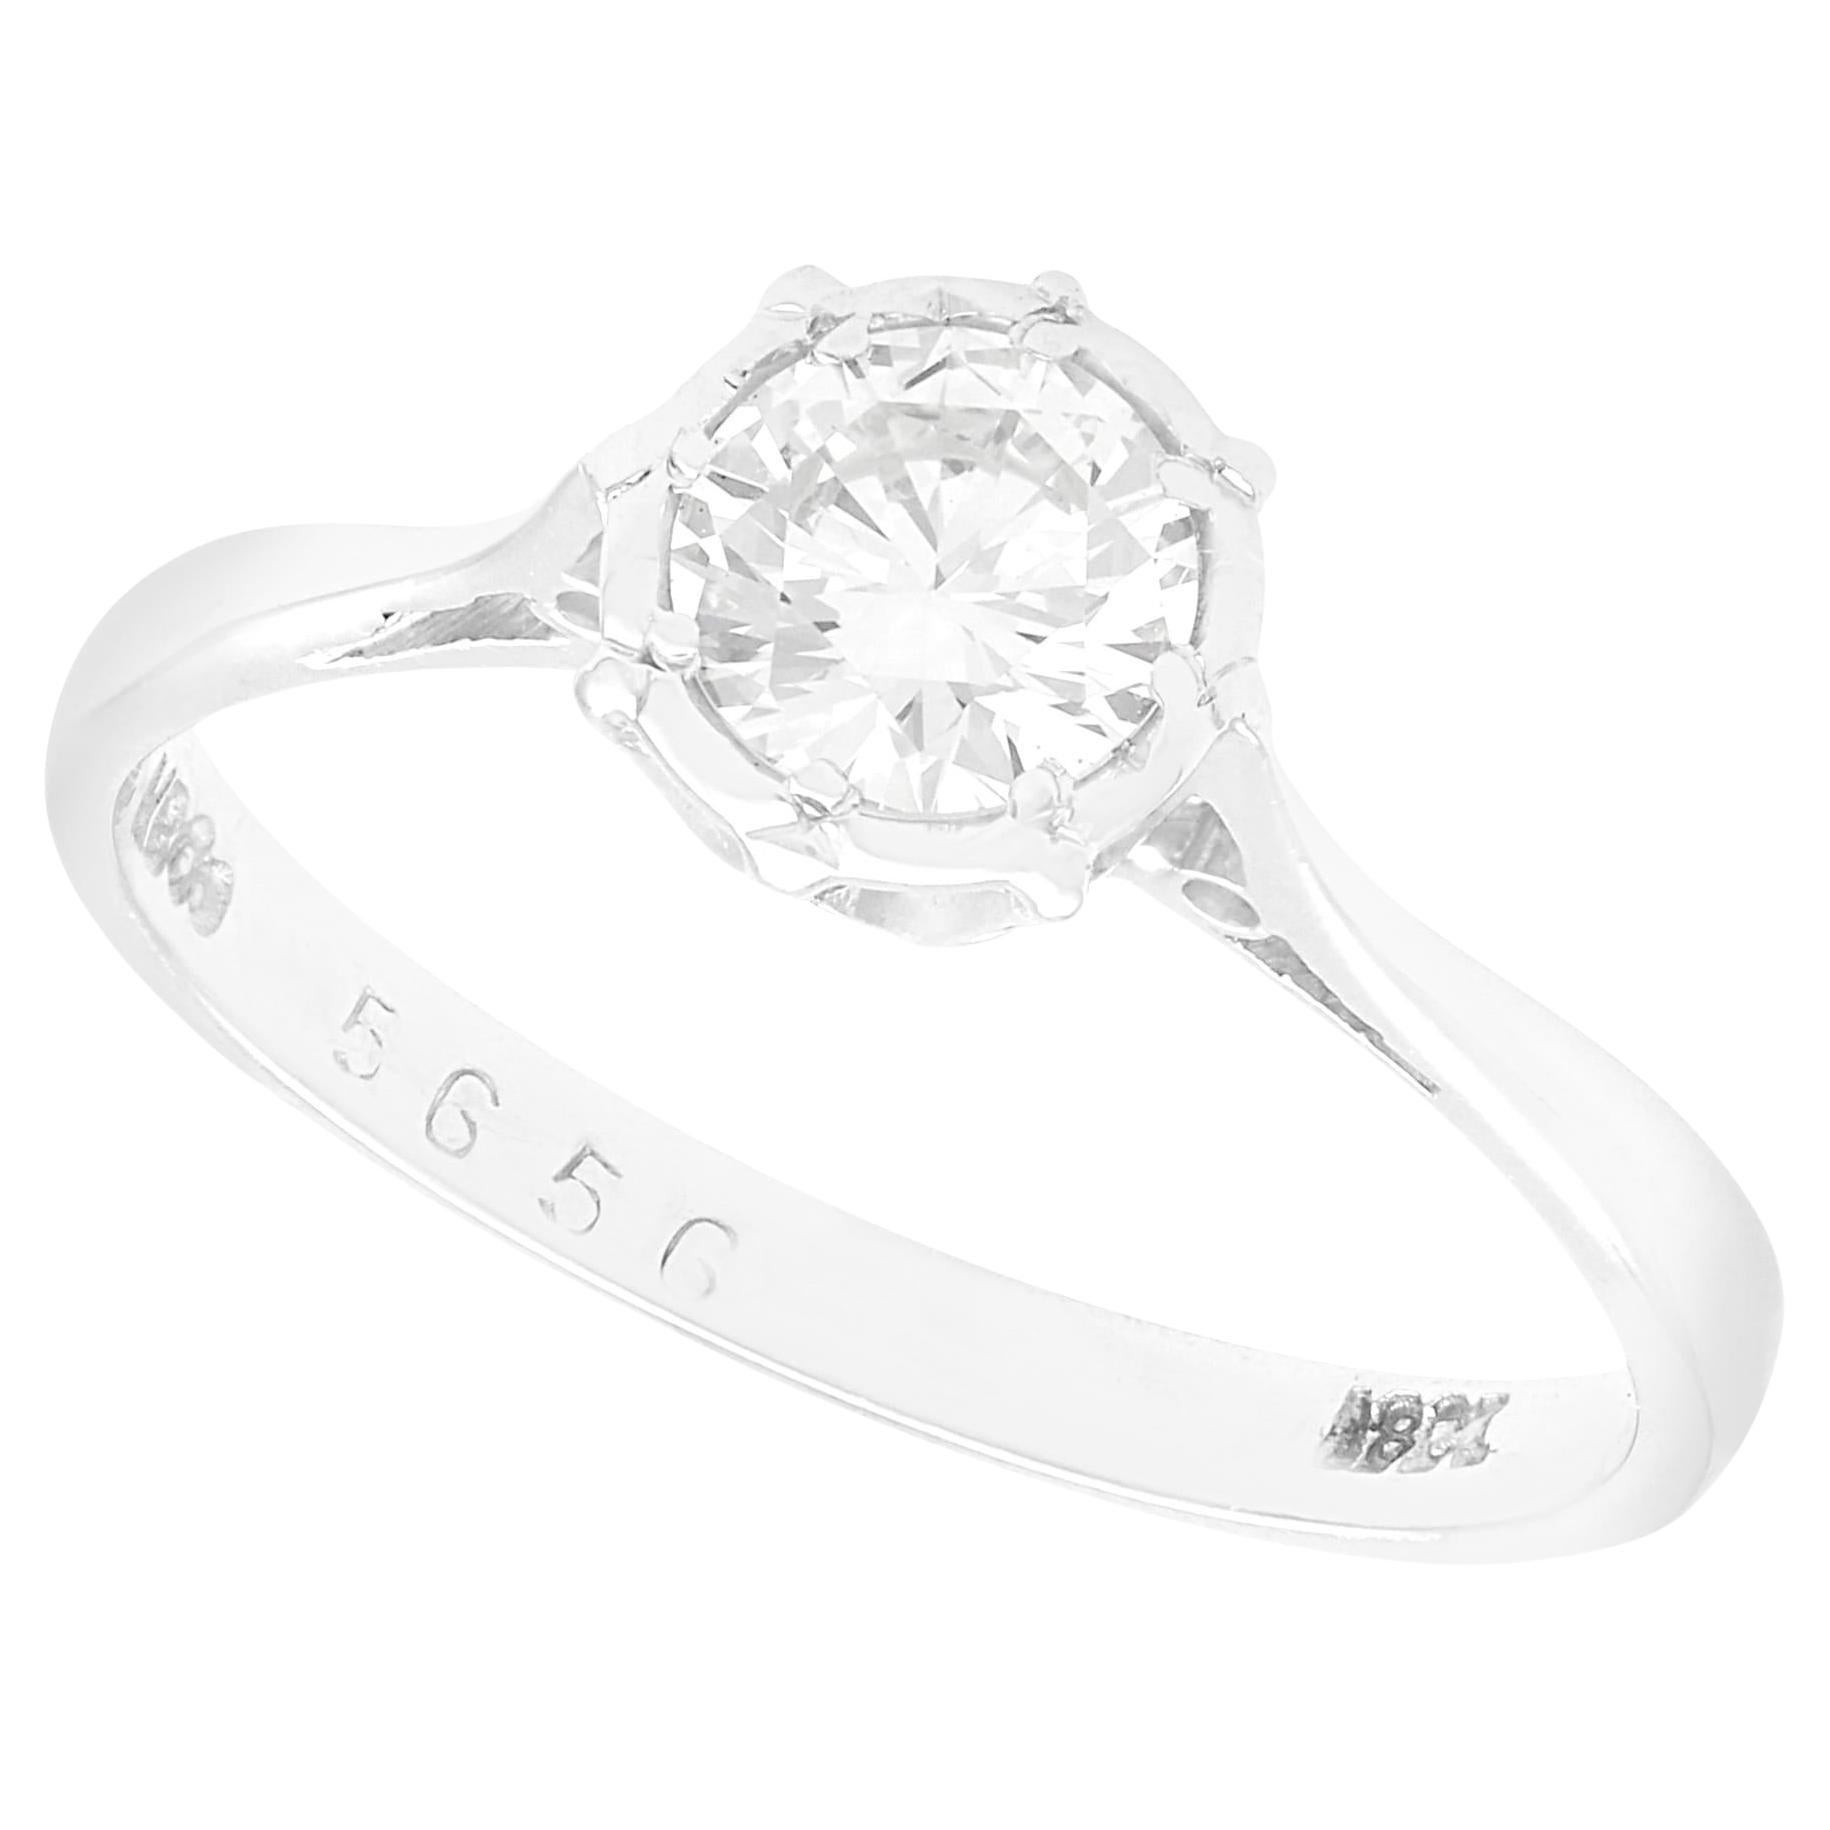 Antique 0.59 Carat Diamond Solitaire Engagement Ring in 18k White Gold For Sale